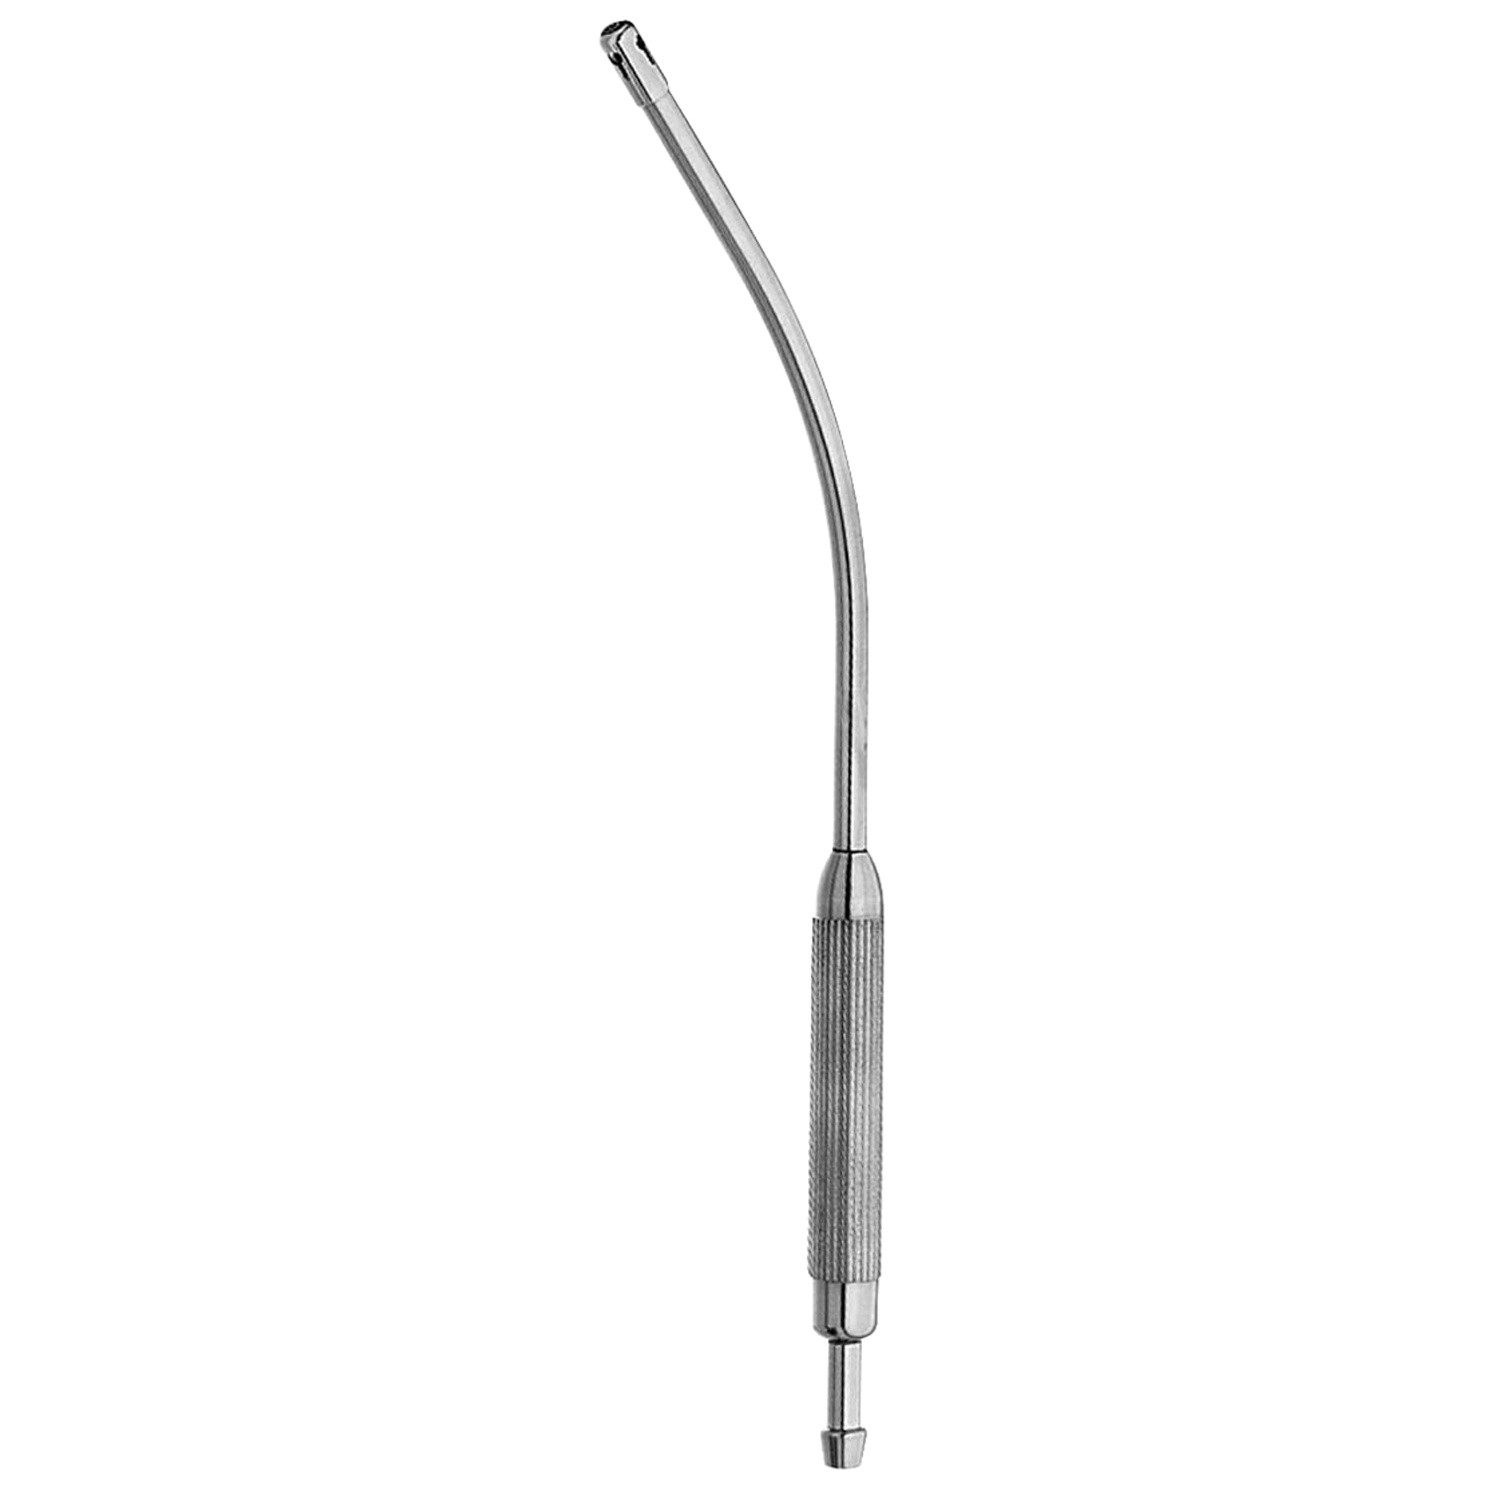 Cooley Intracardiac Suction Tube, Detachable 9 Mm Wide Tip, 11 1/4" (28.6 Cm)